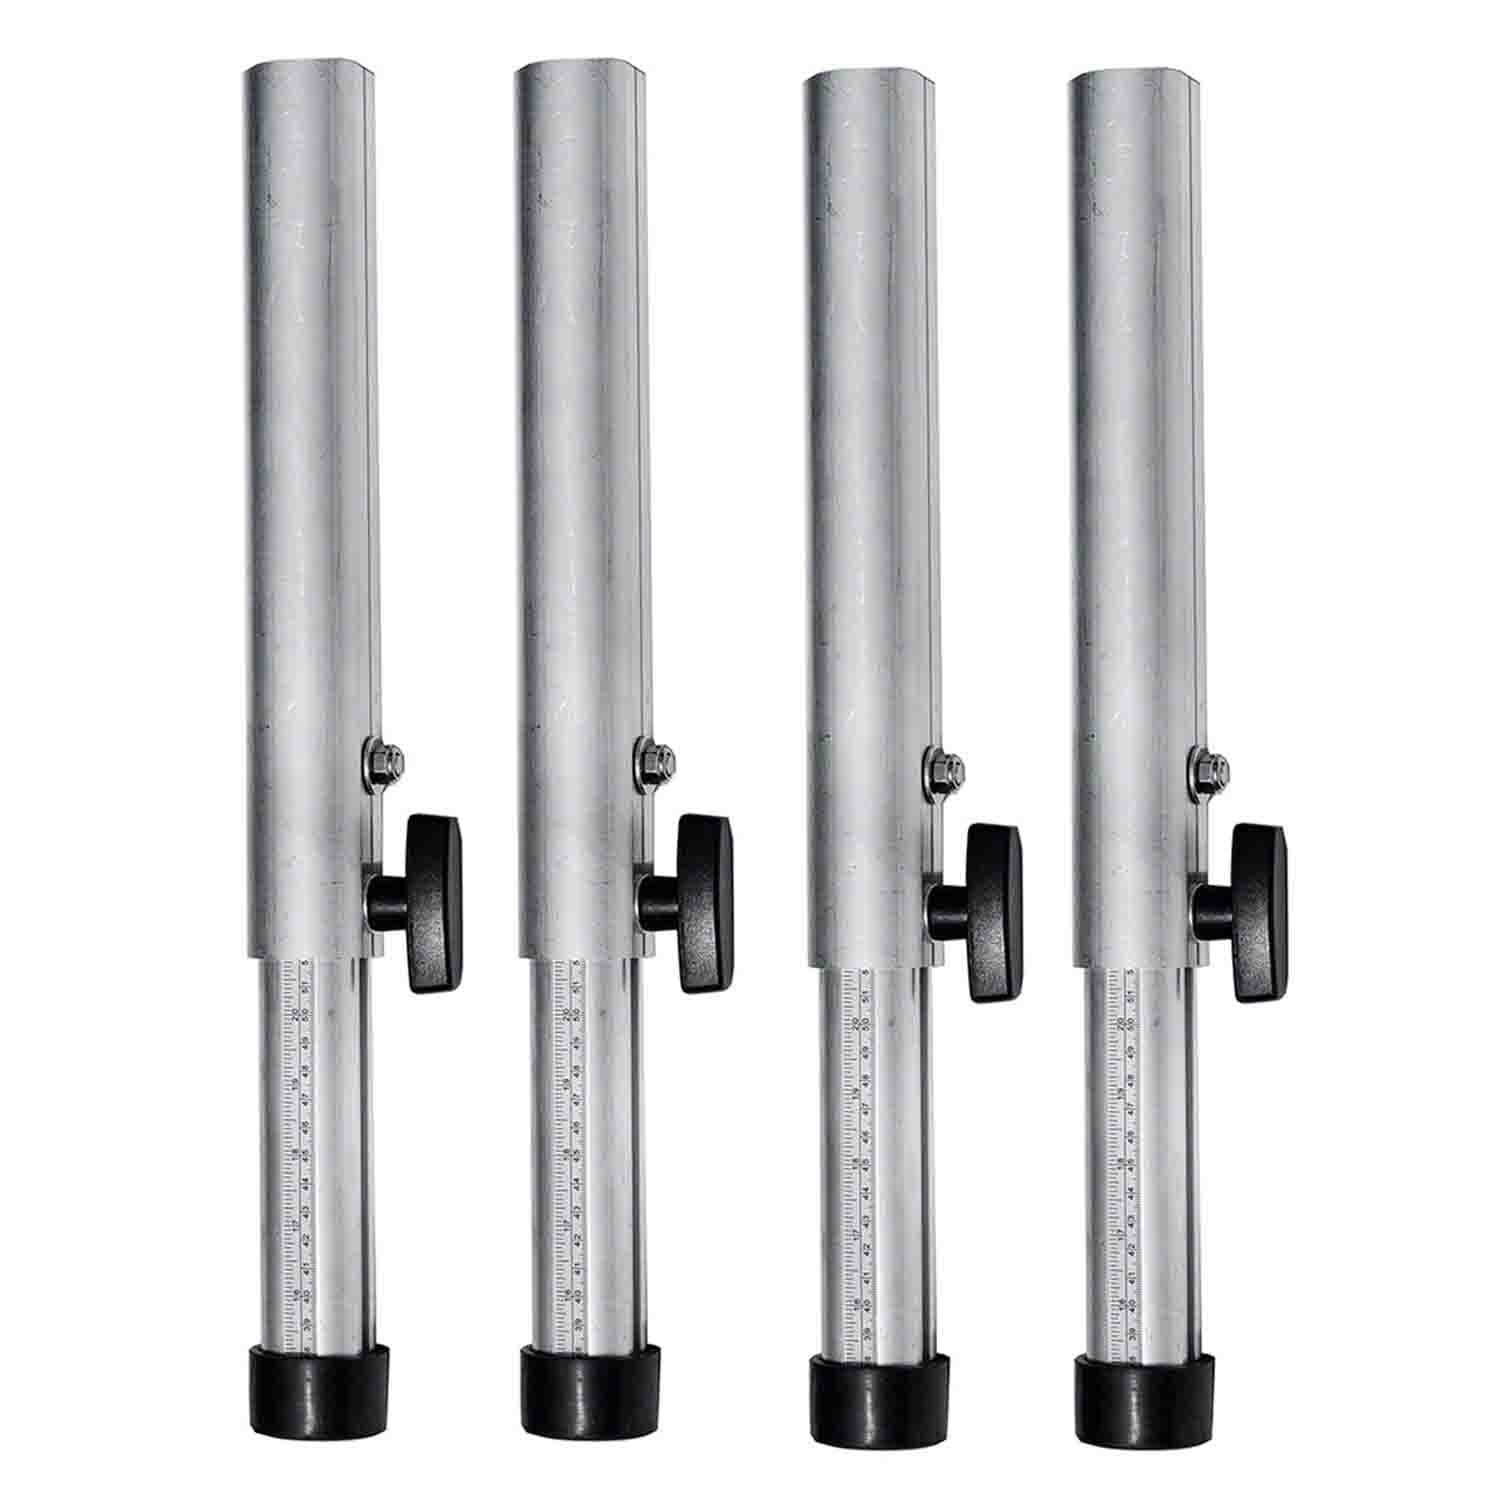 IntelliStage Subcomponent QL4TL1 Telescopic Leg Adjustable from 16" to 24" - 4pc - Hollywood DJ